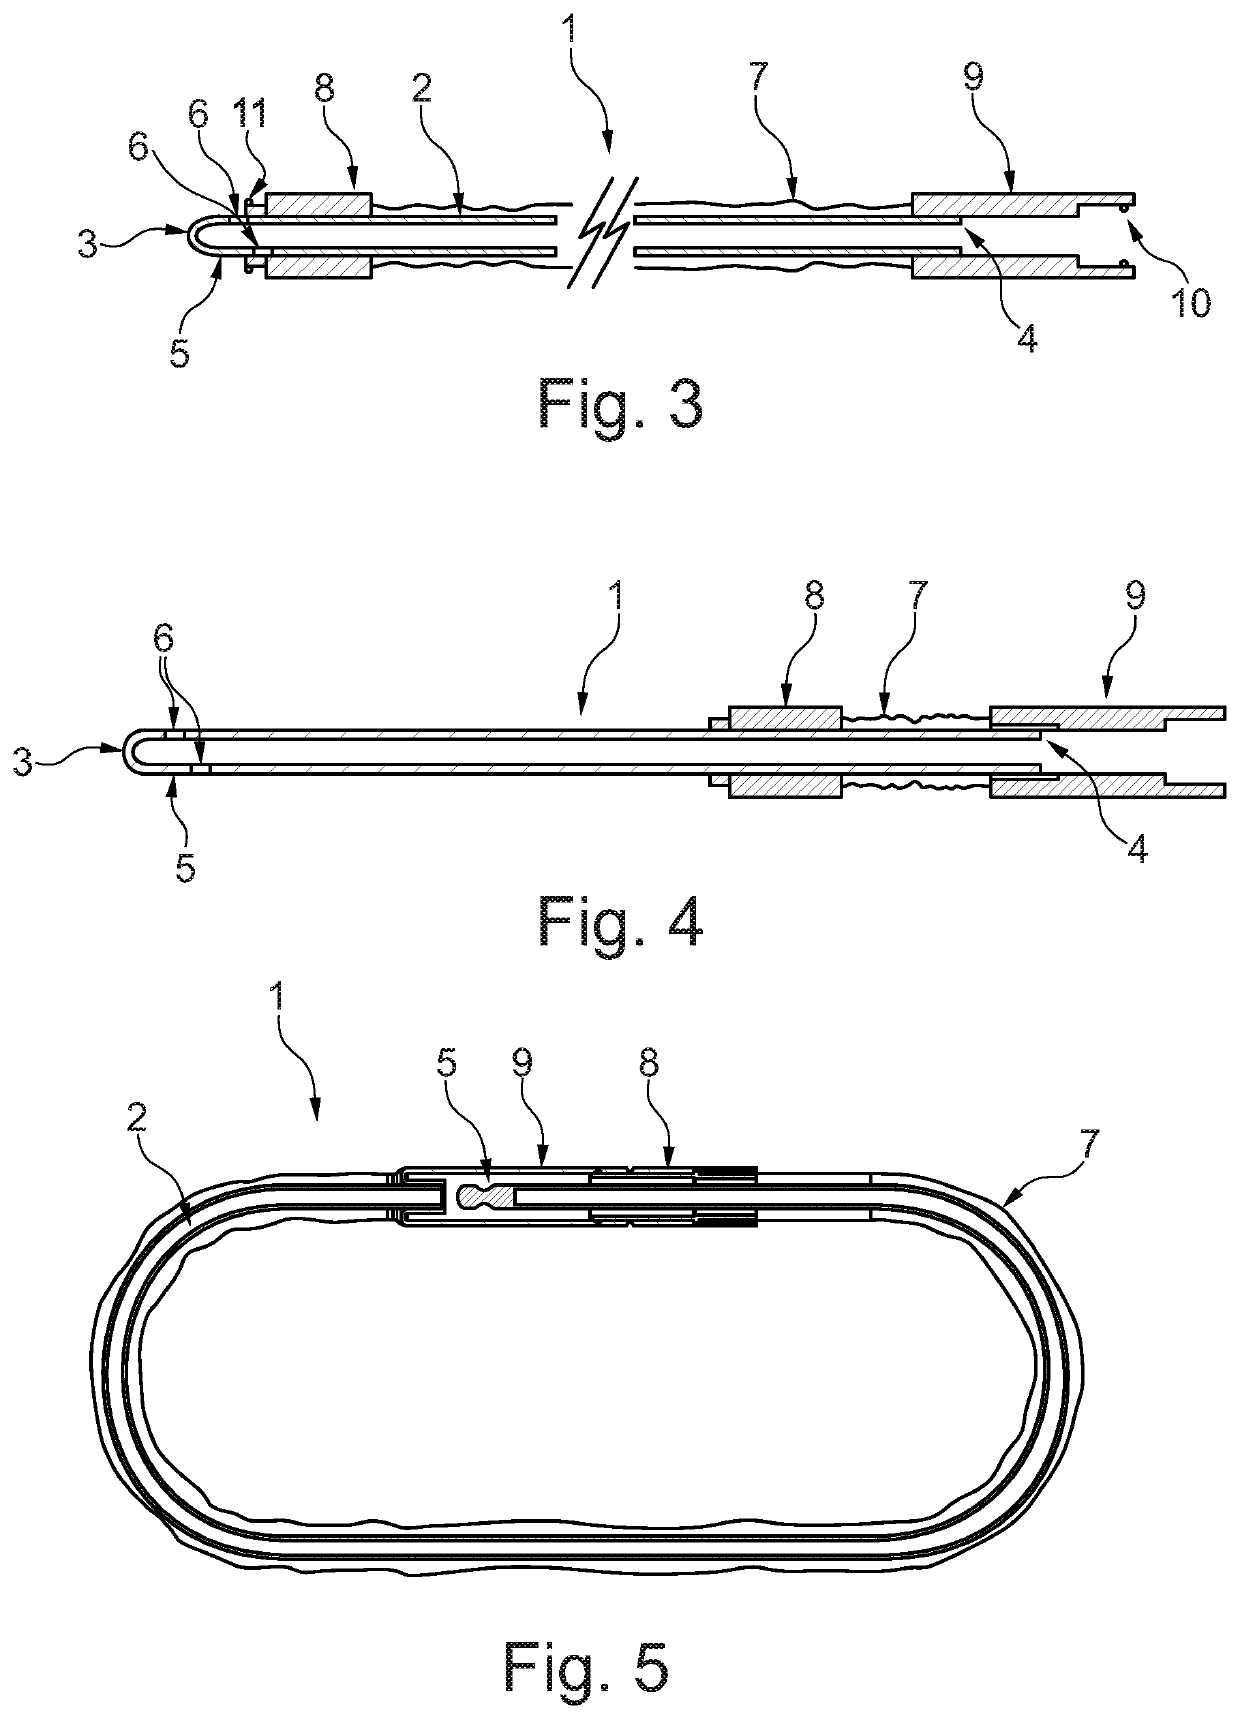 An intermittent urinary catheter assembly